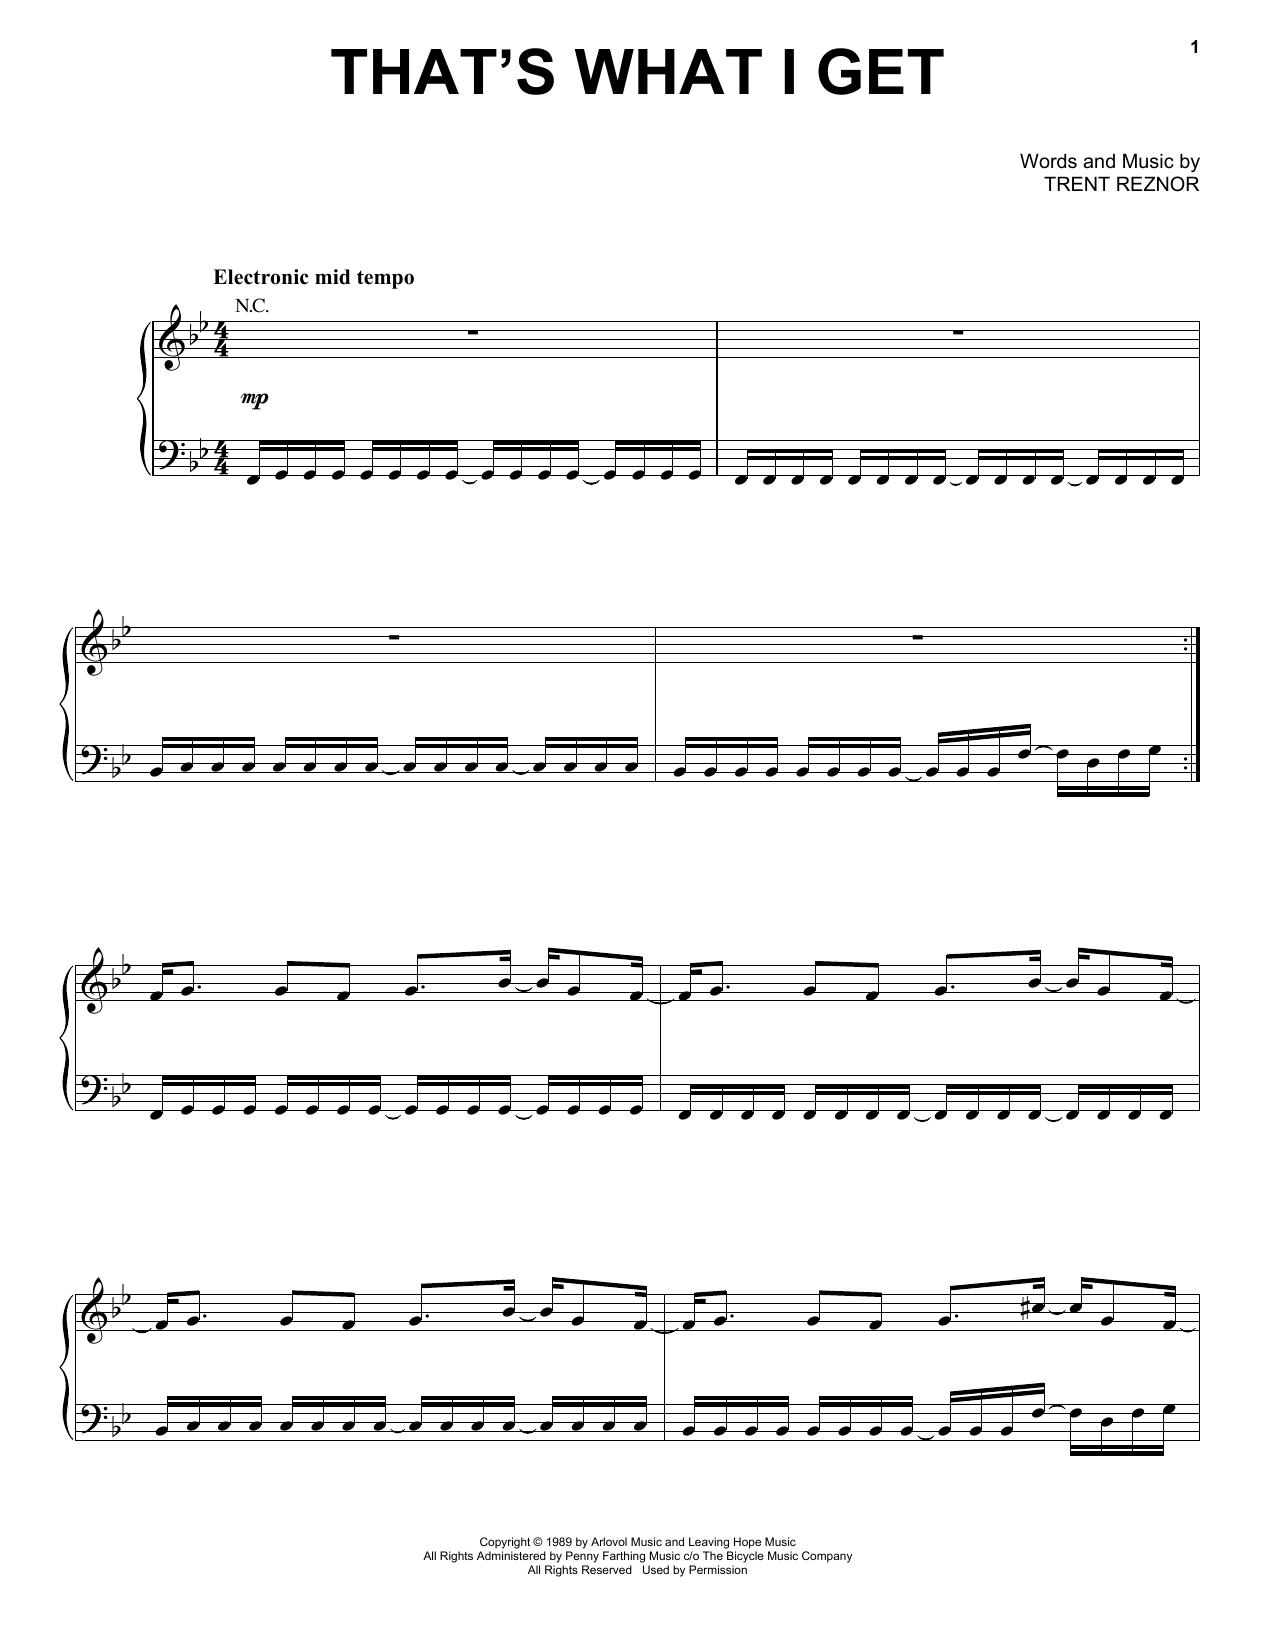 Download Nine Inch Nails That's What I Get Sheet Music